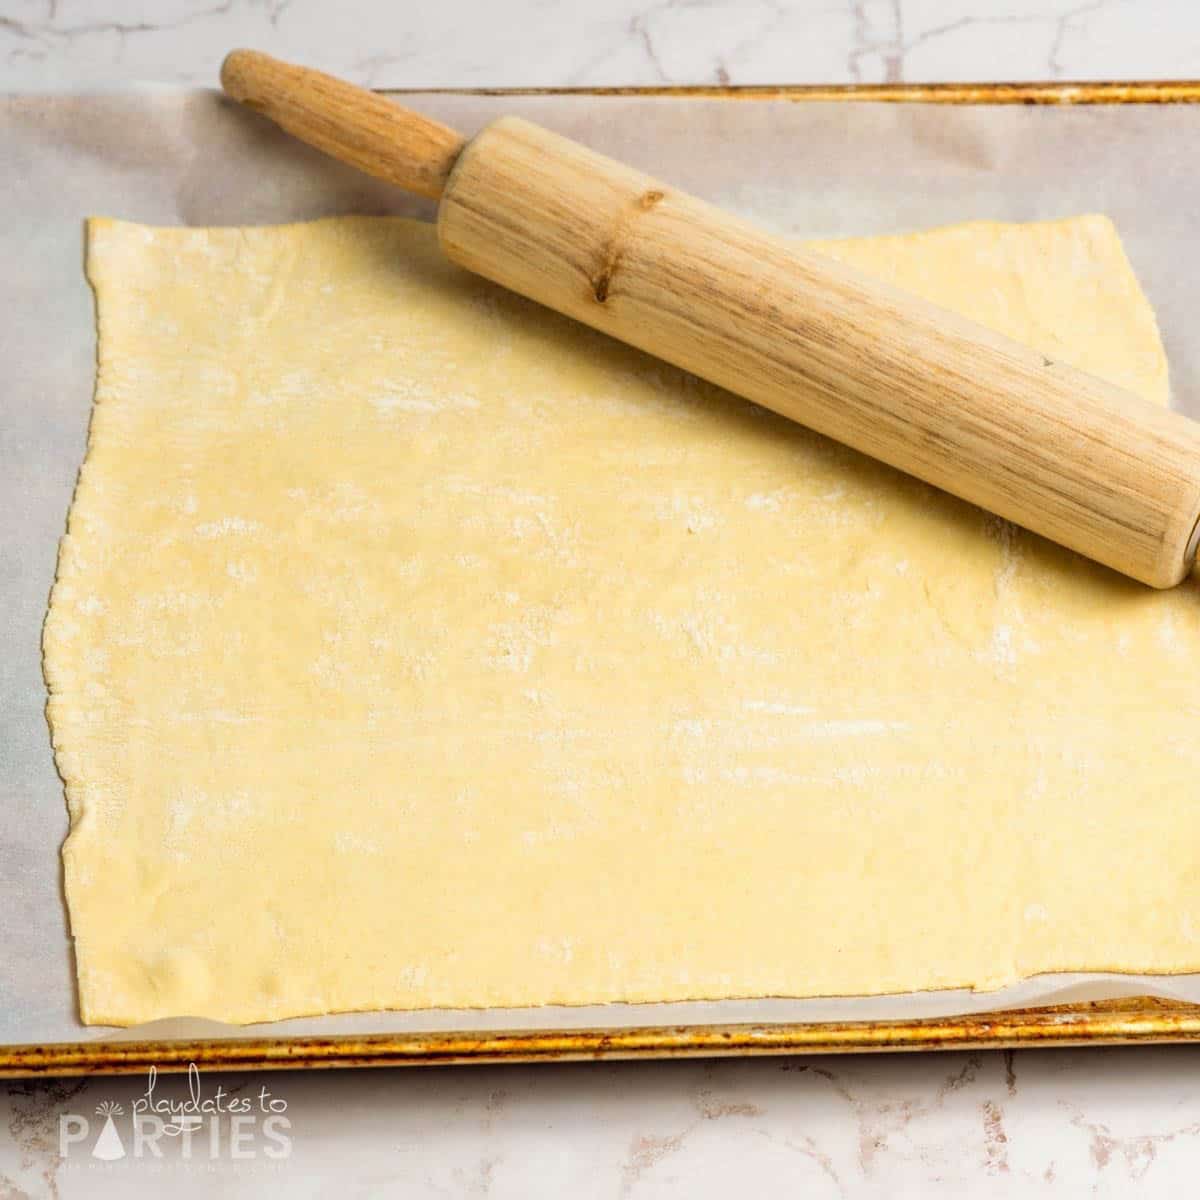 Rolling out puff pastry on a baking sheet.